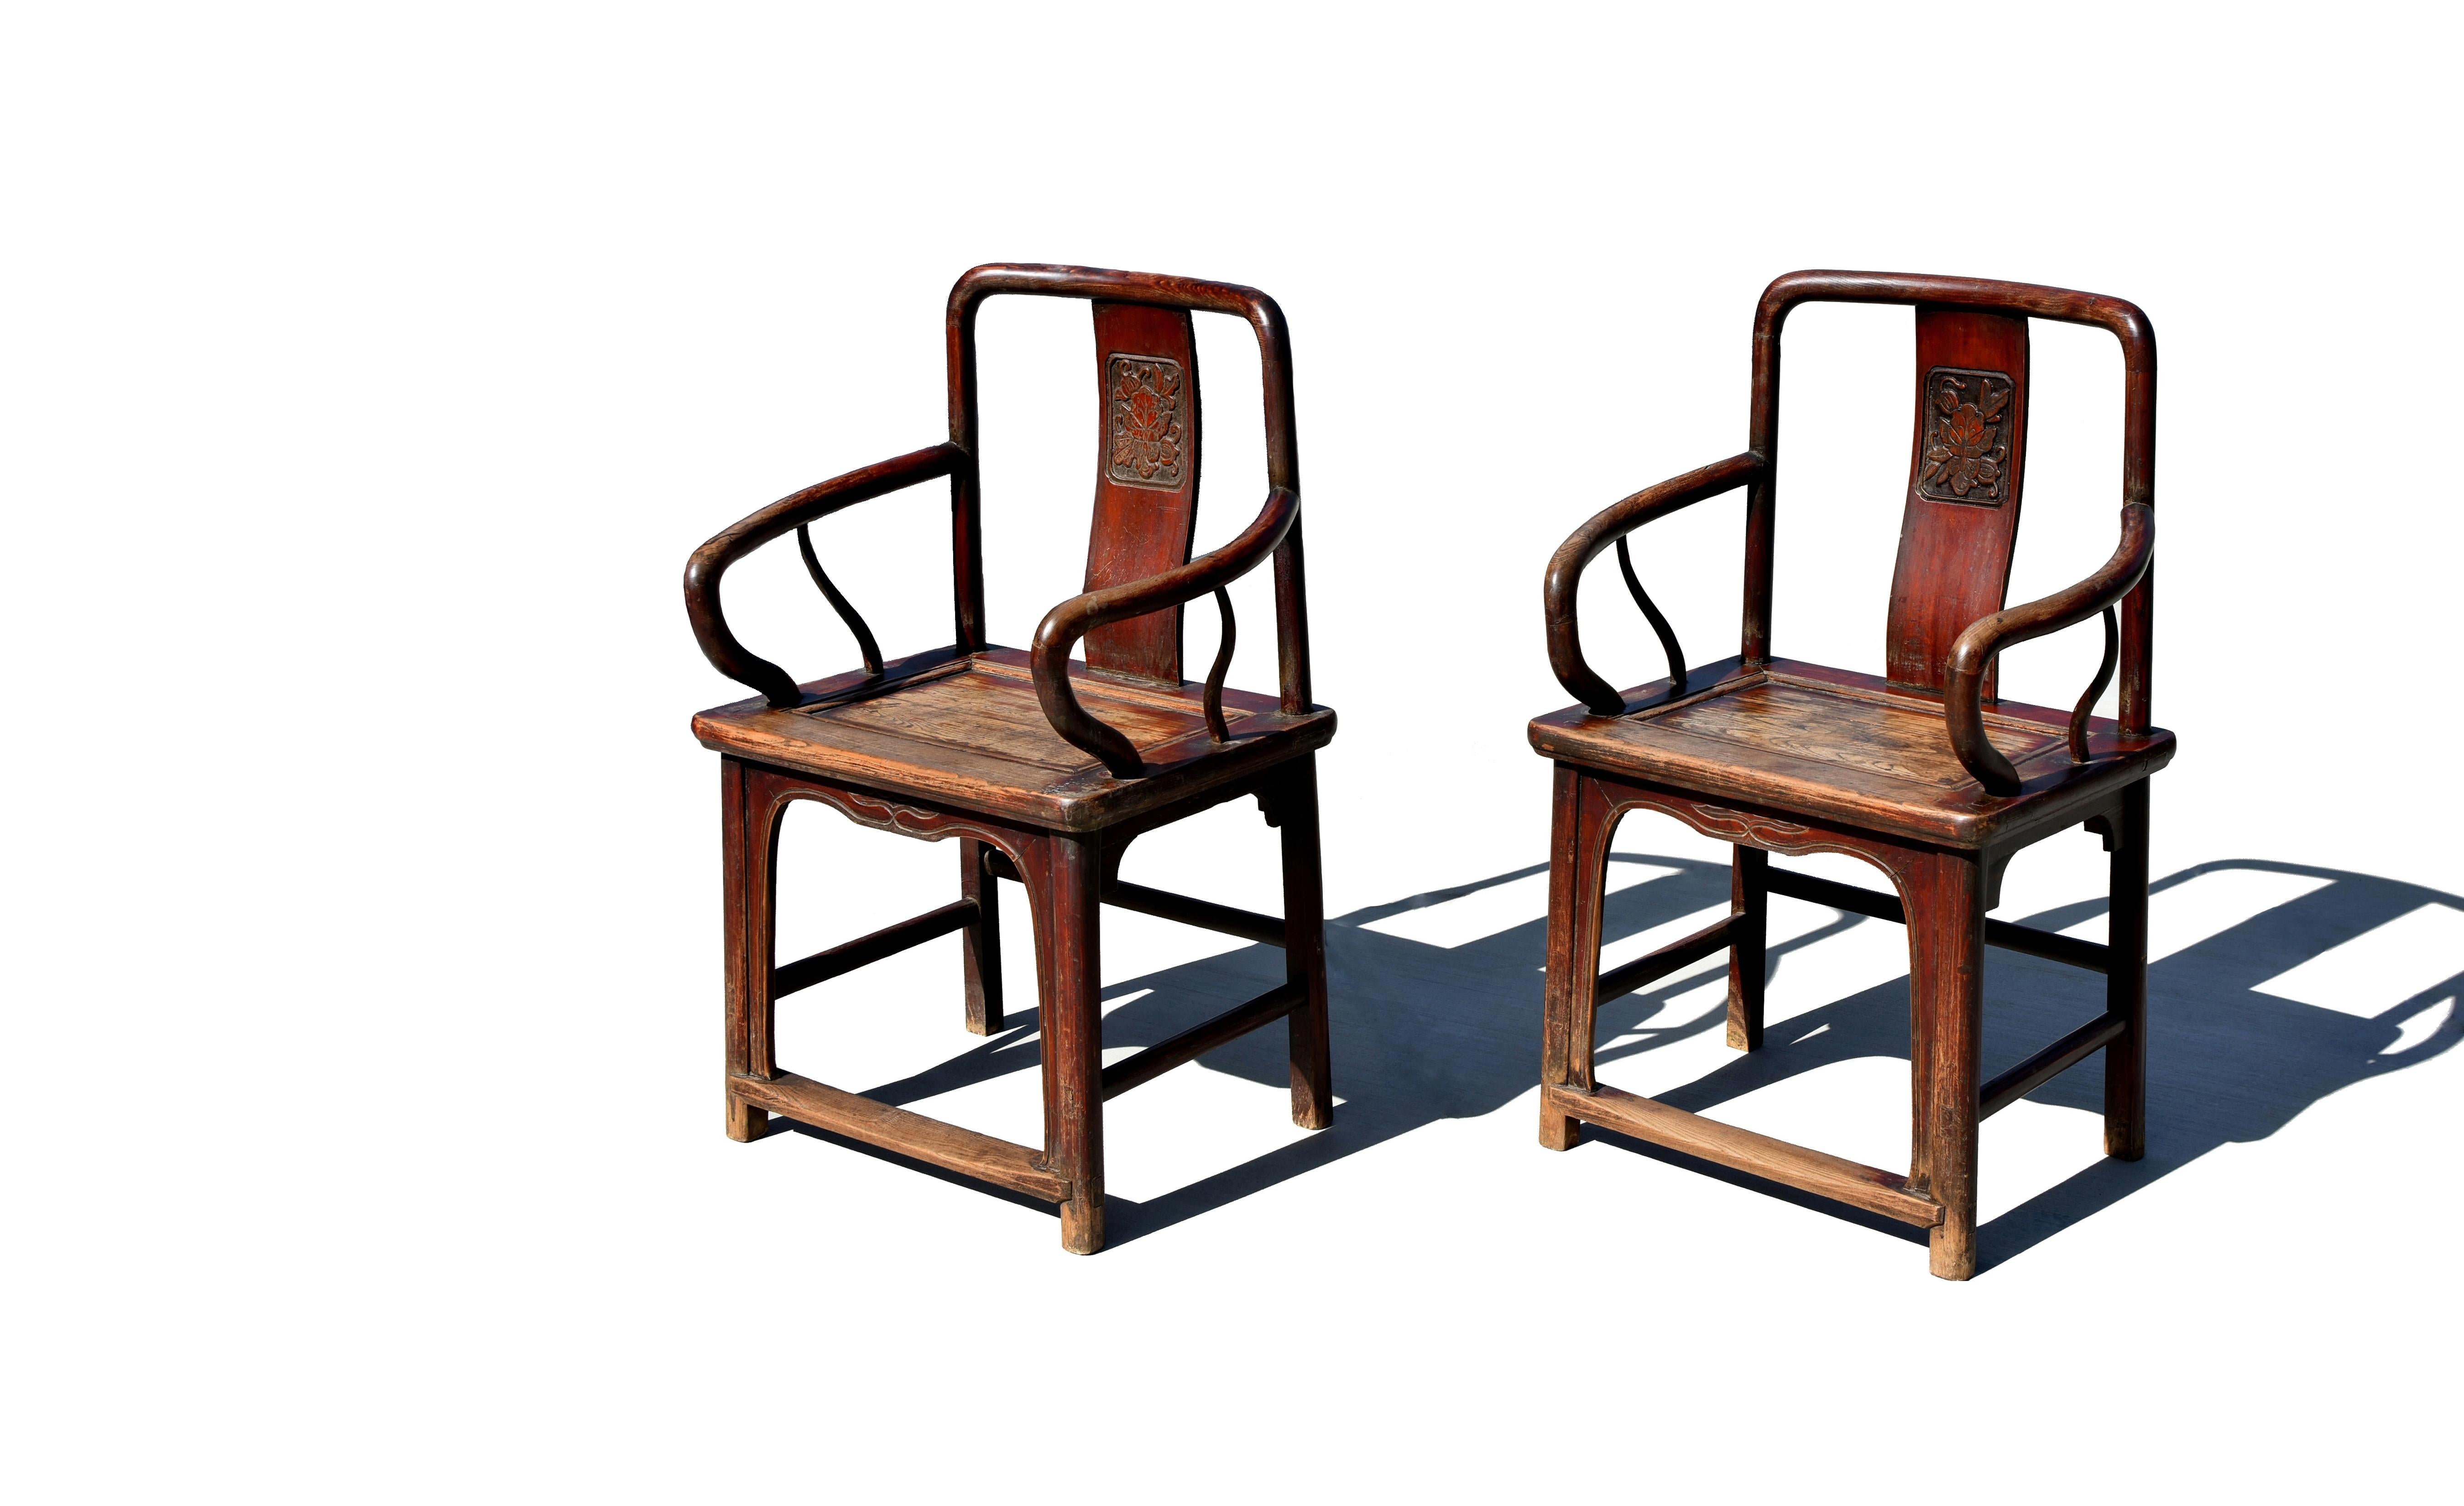 A pair of large 19th century Chinese elmwood armchairs. An elegant crestrail meets the back stiles which extend all the way through the member of the seat frame to become the back legs. The solid splat carved with a peony descends from the center of